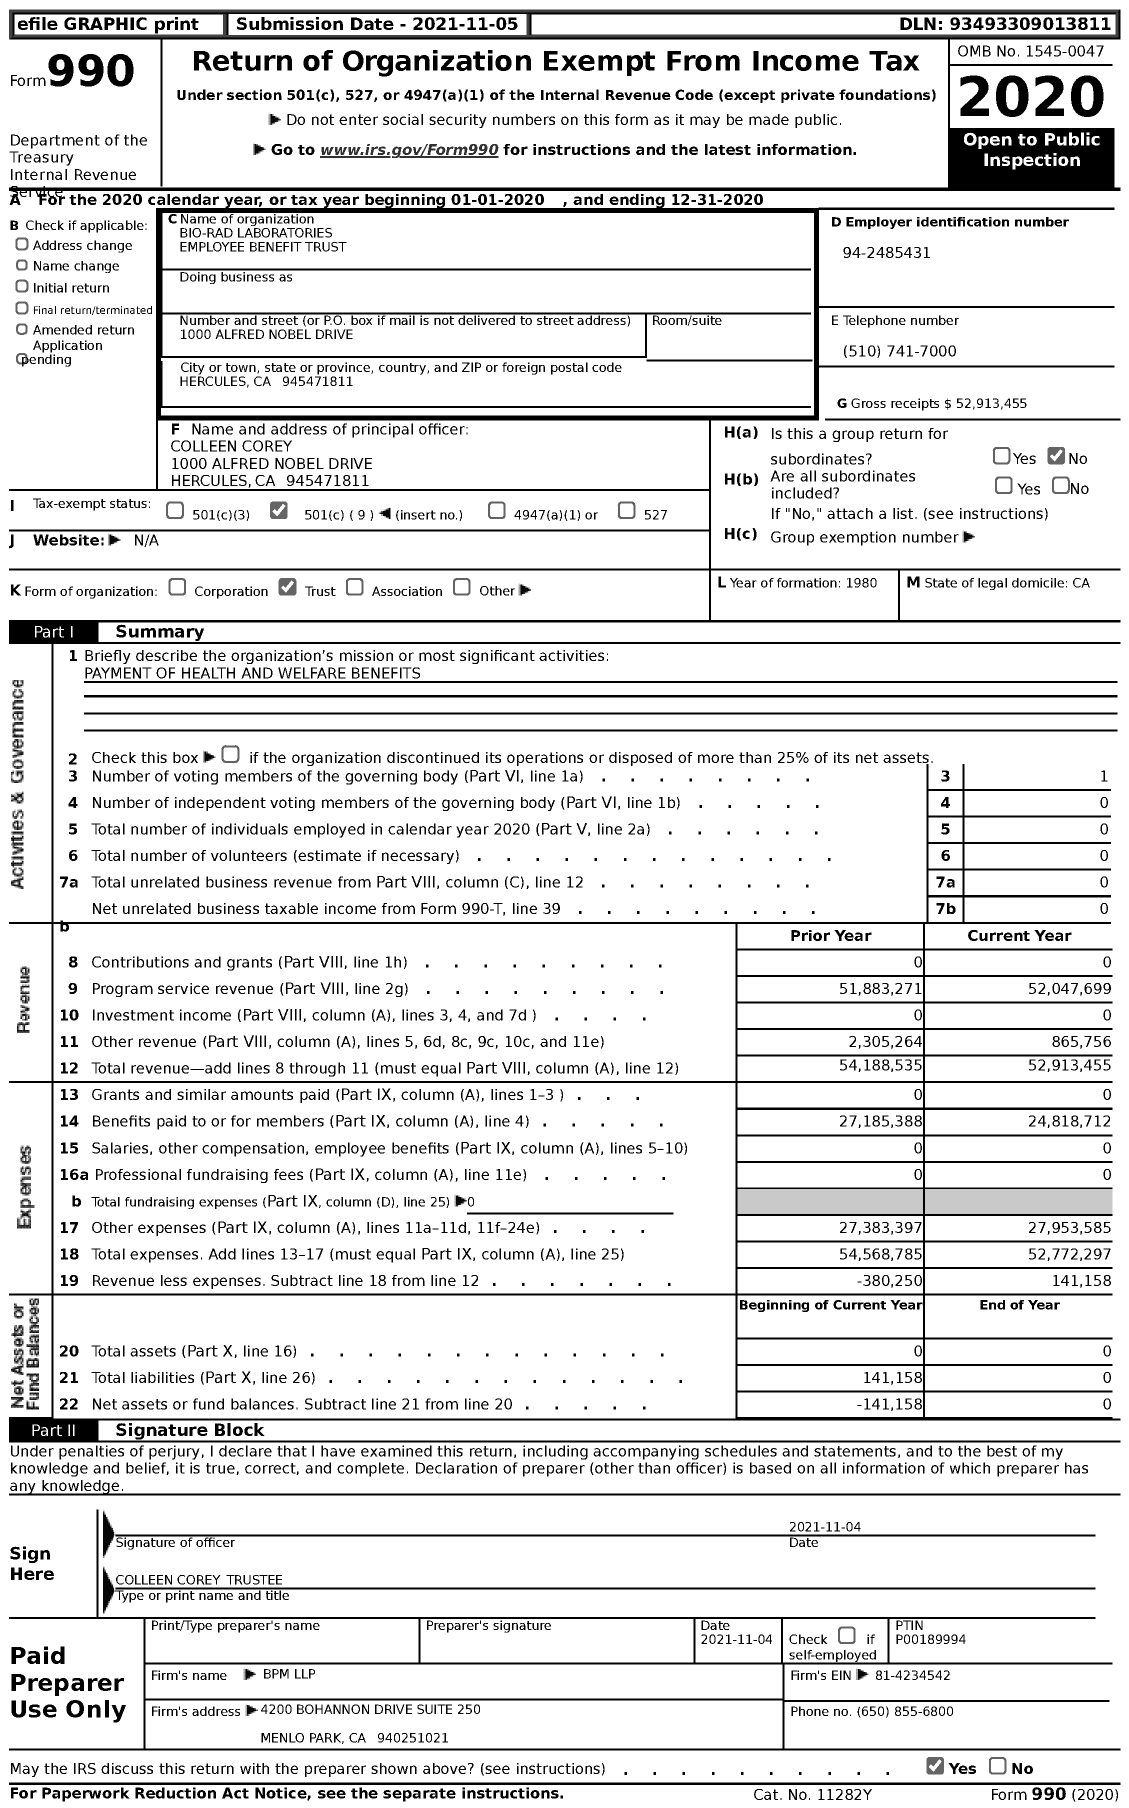 Image of first page of 2020 Form 990 for Bio-Rad Laboratories Employee Benefit Trust